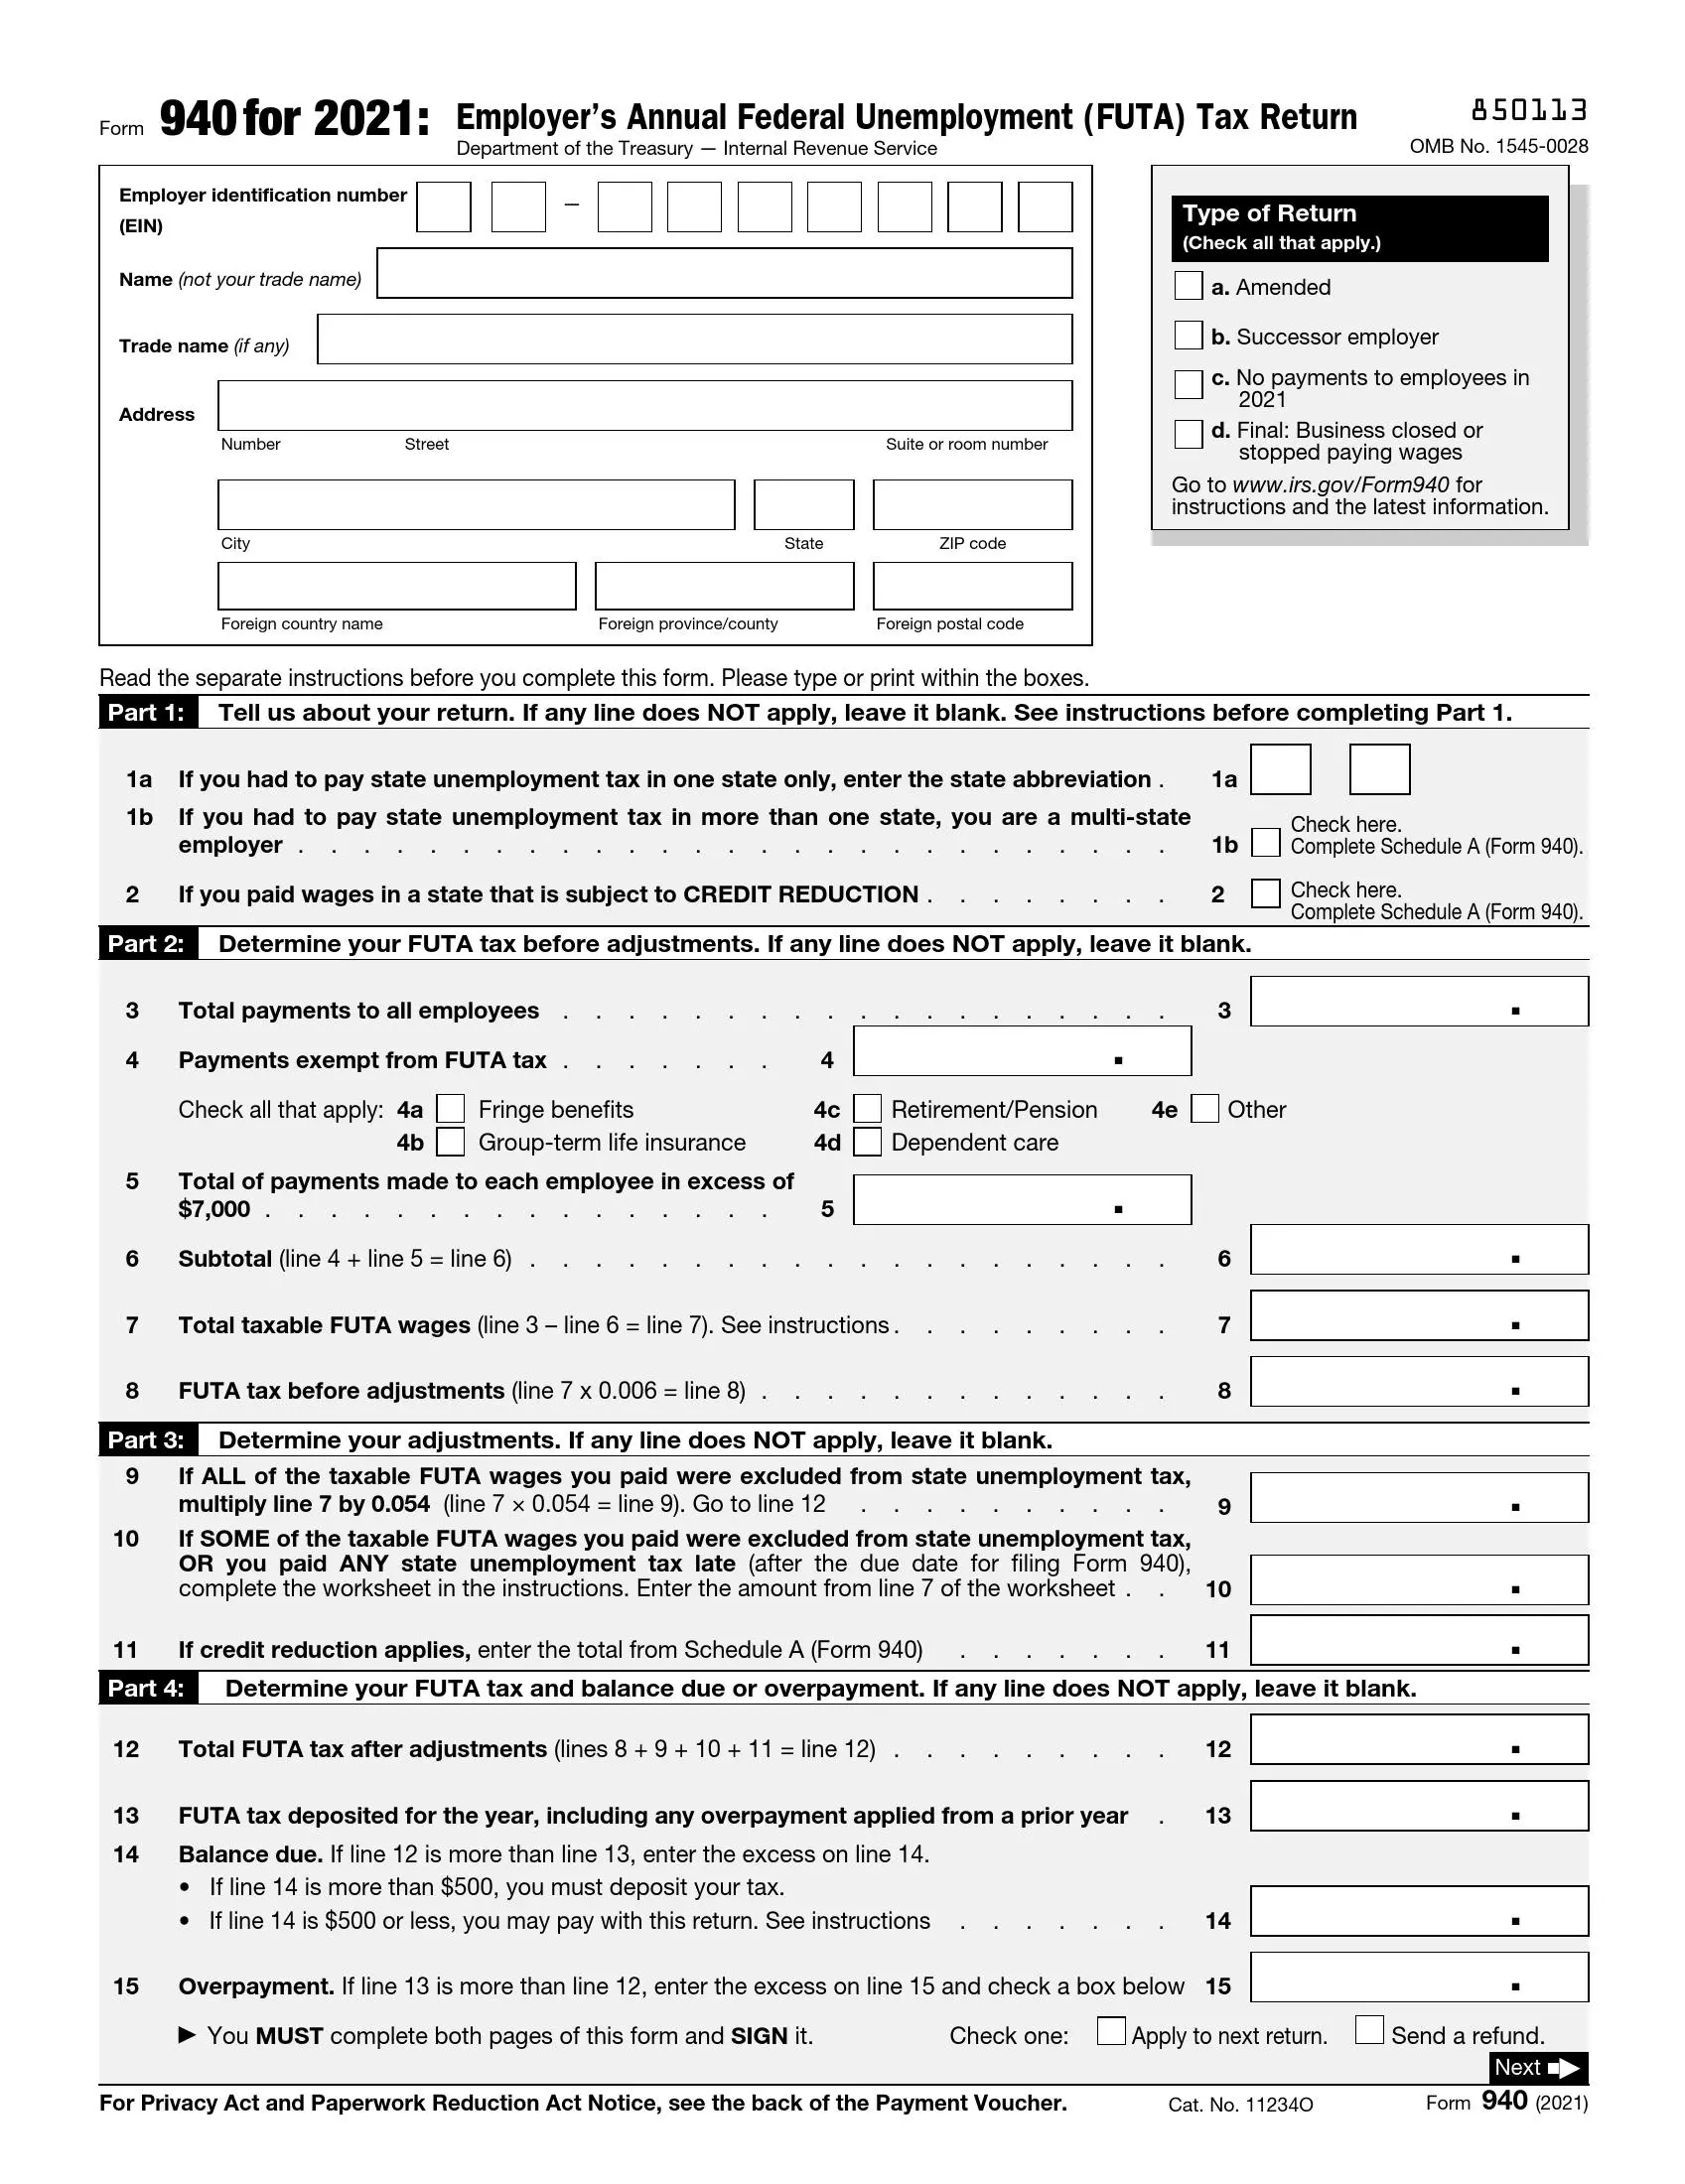 irs form 940 2021 preview